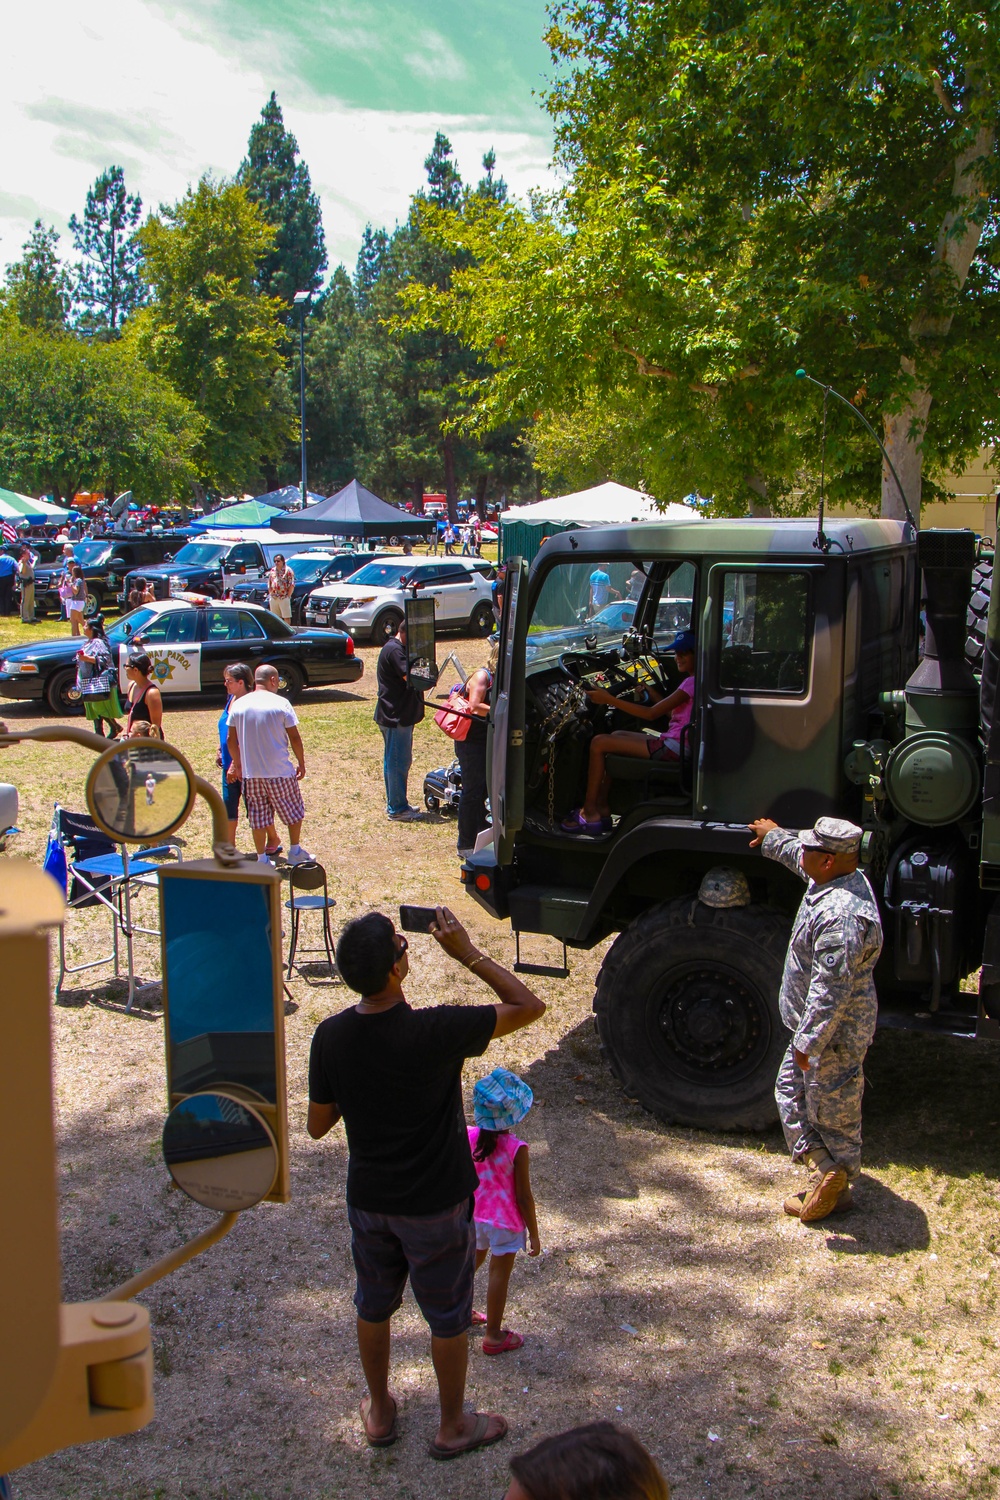 The Army Reserve shows off at car show